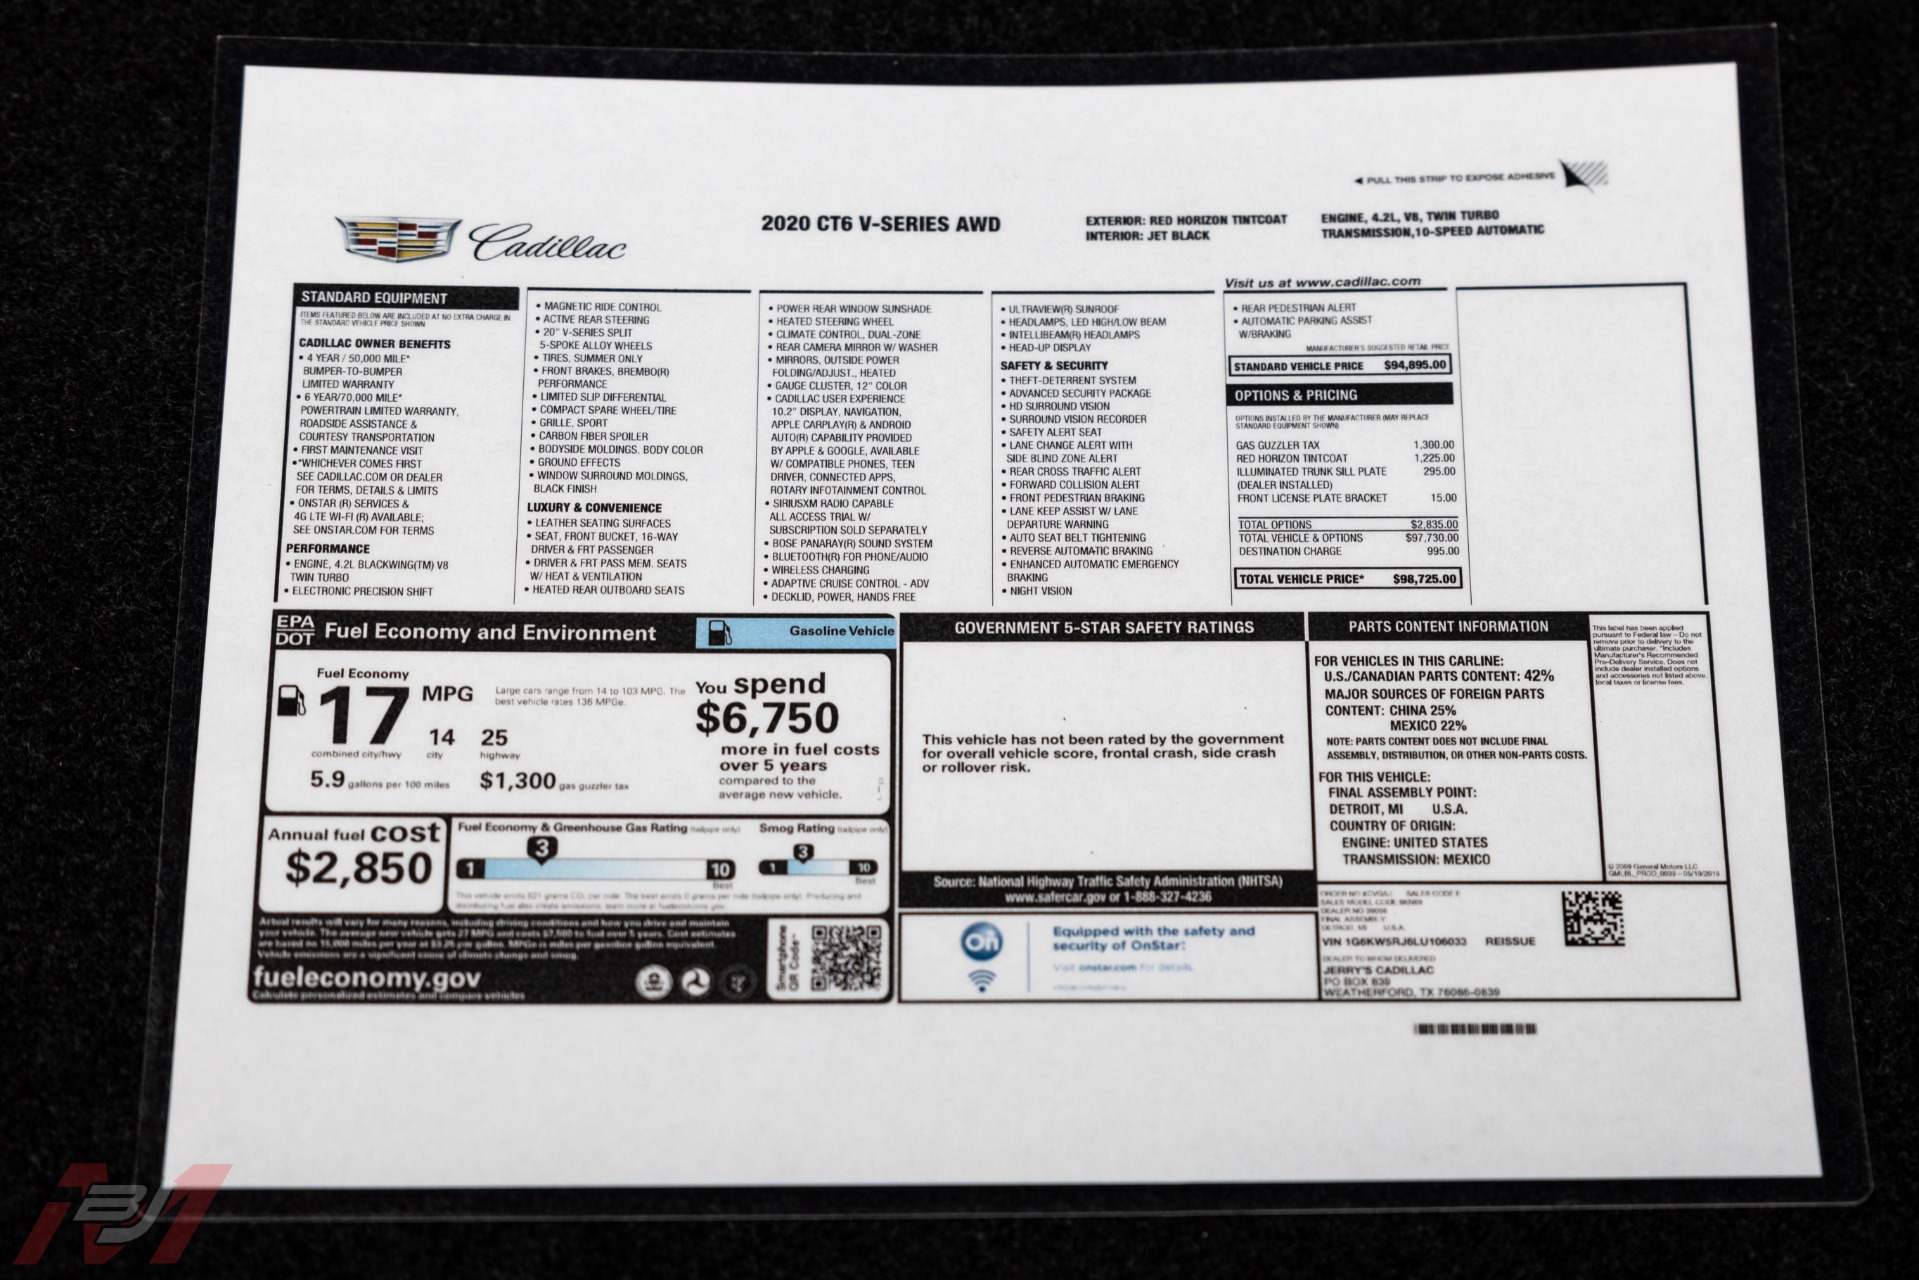 Used-2020-Cadillac-CT6-V-Blackwing-1-of-600